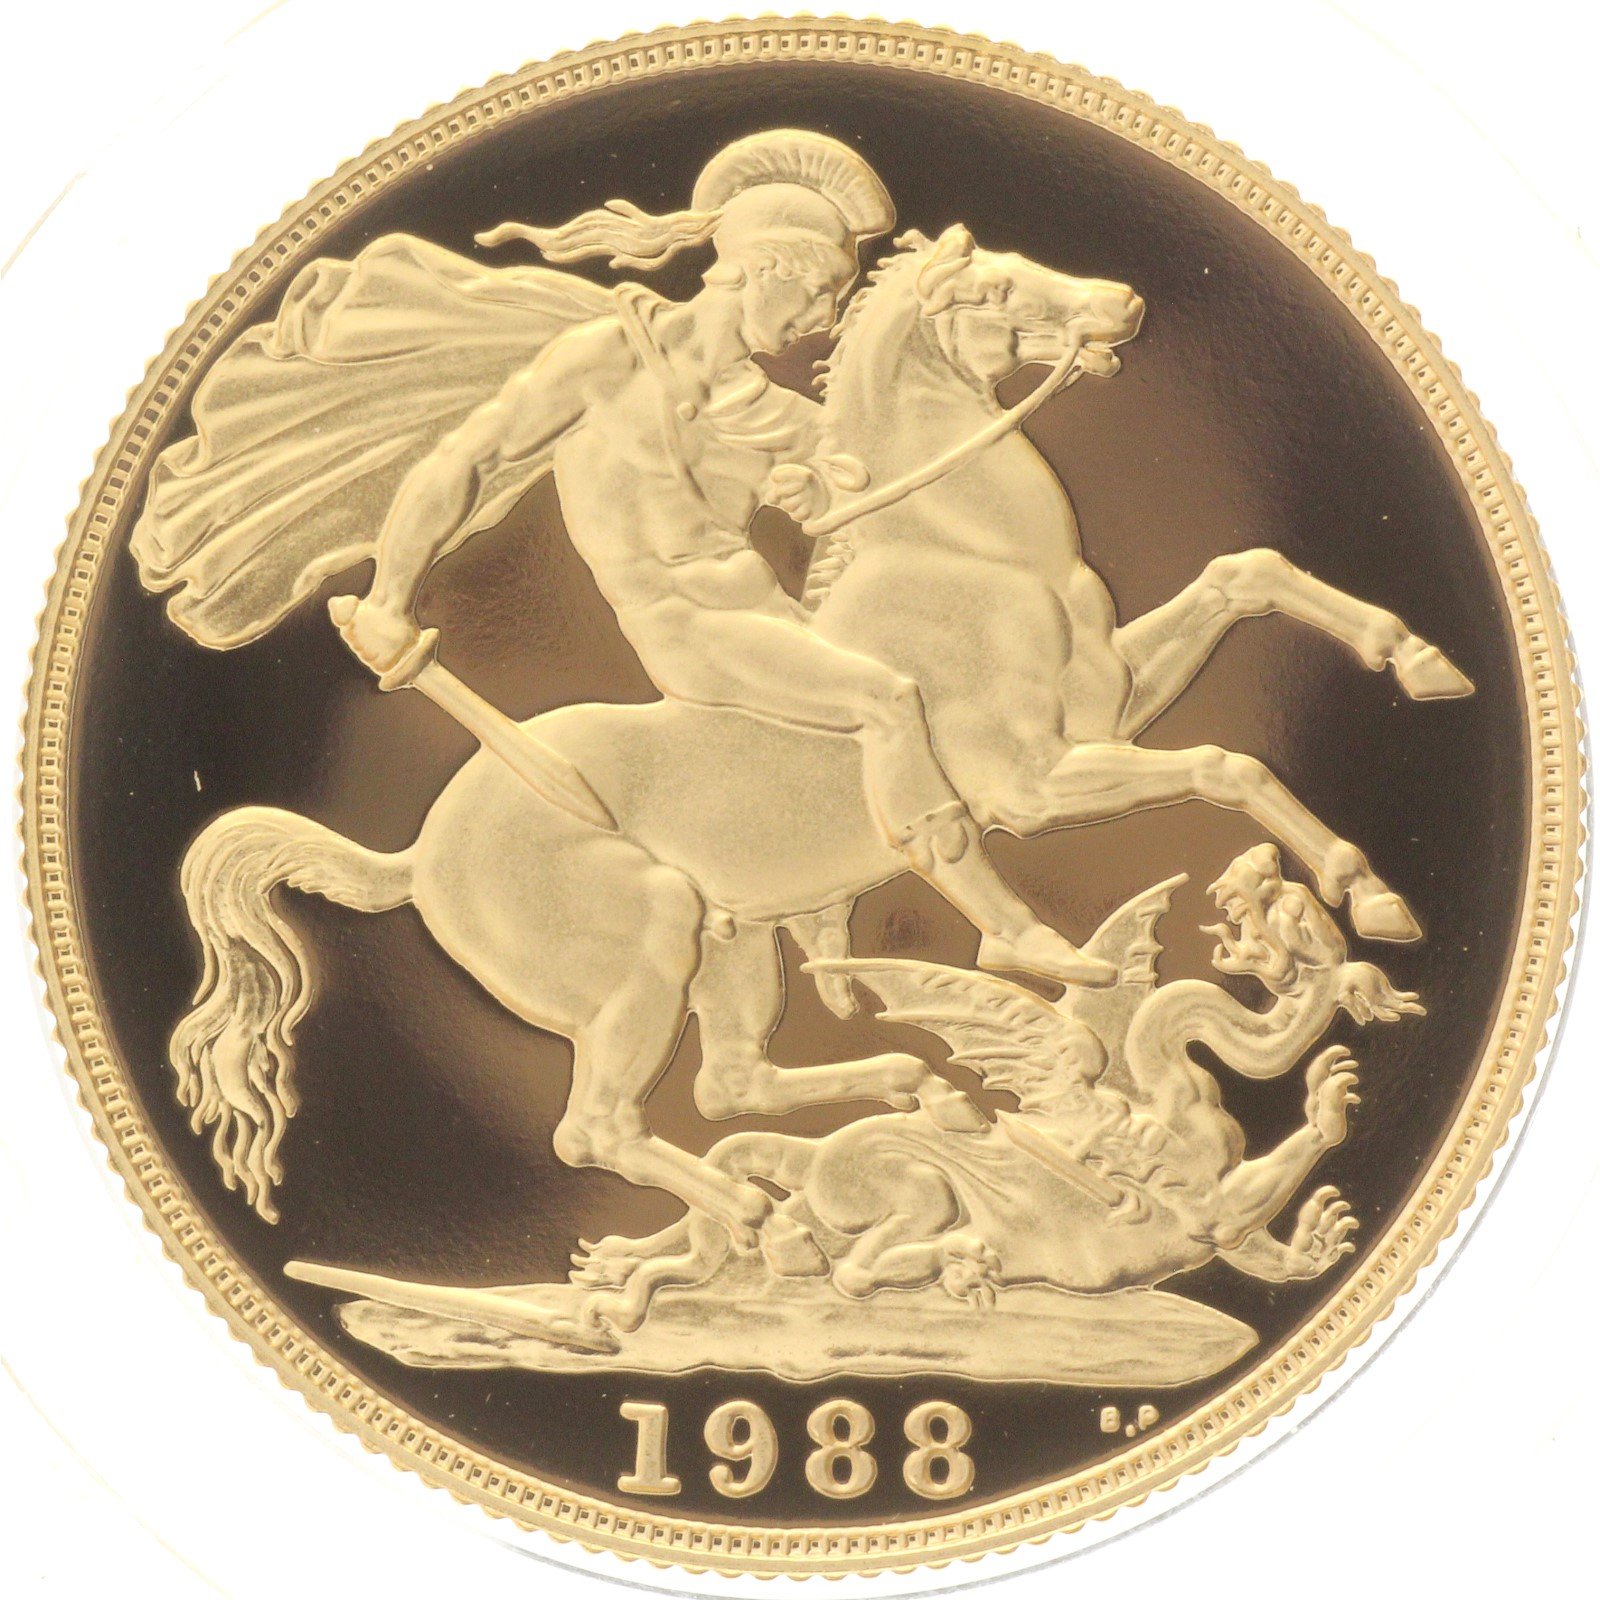 United Kingdom - 1988 - Gold Proof Collection